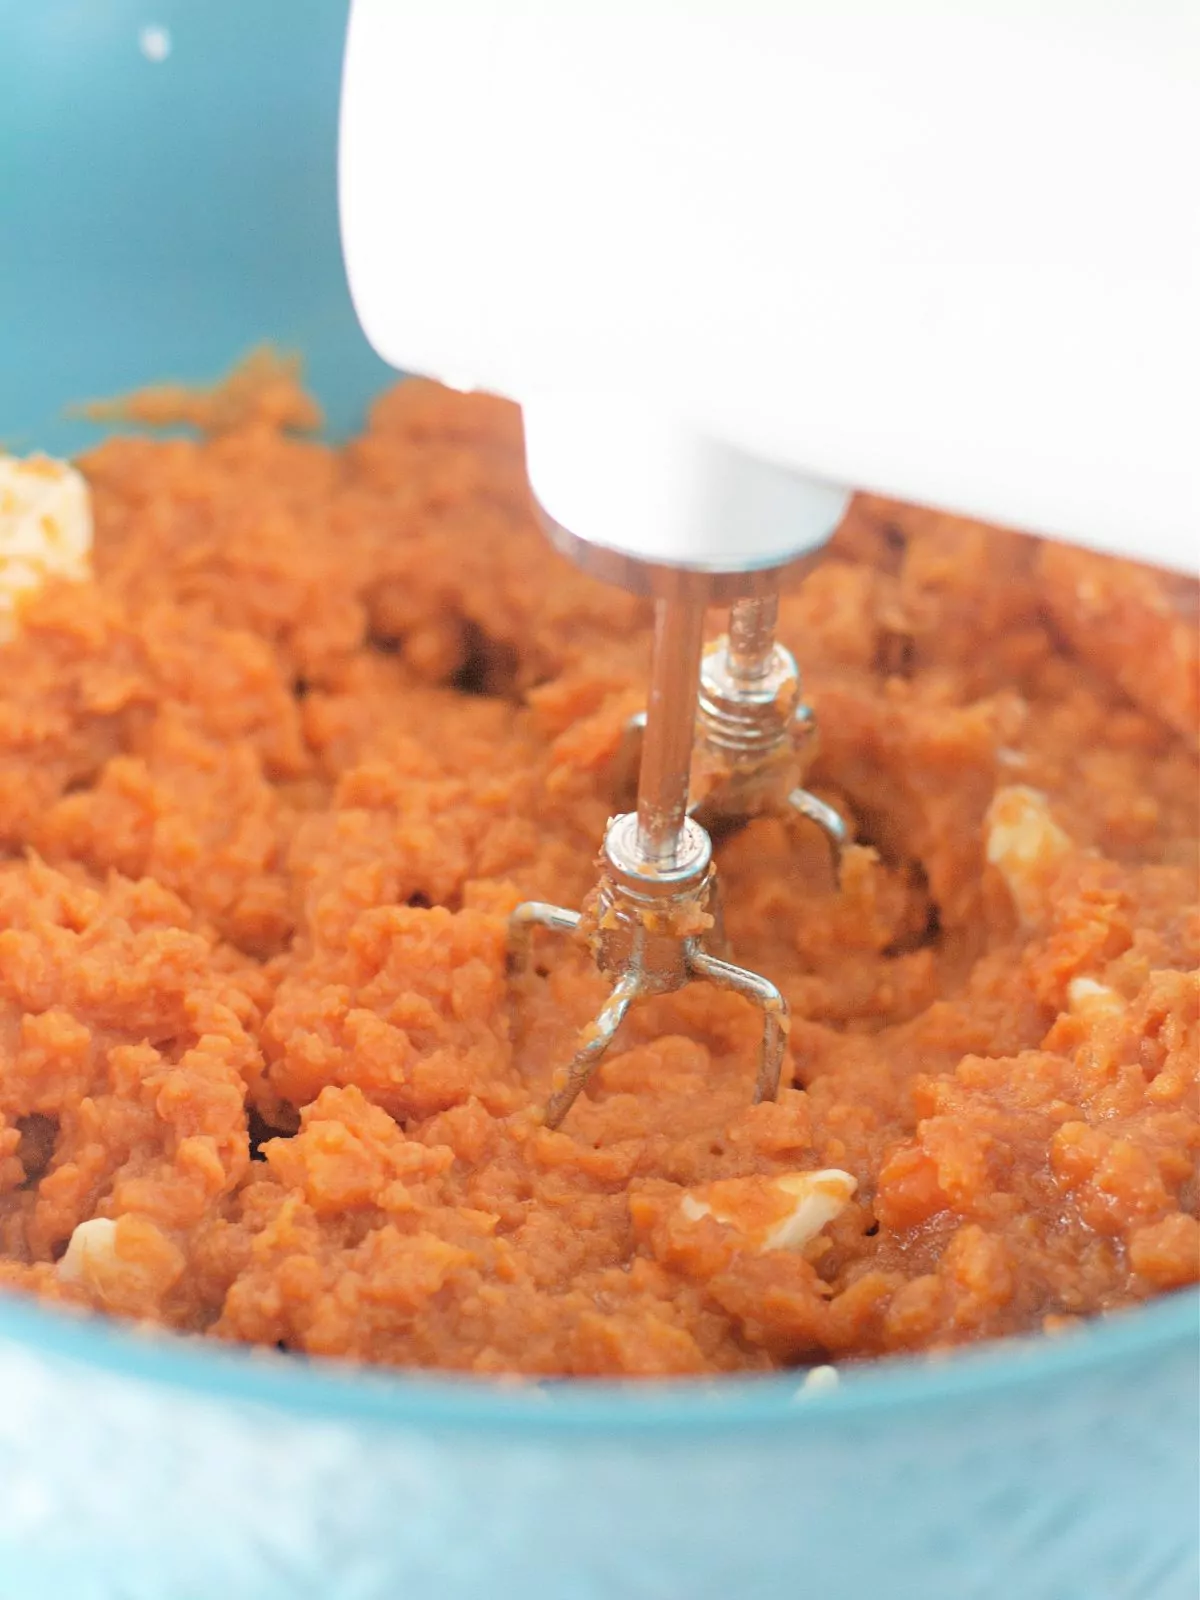 mashed sweet potatoes with electric mixer.